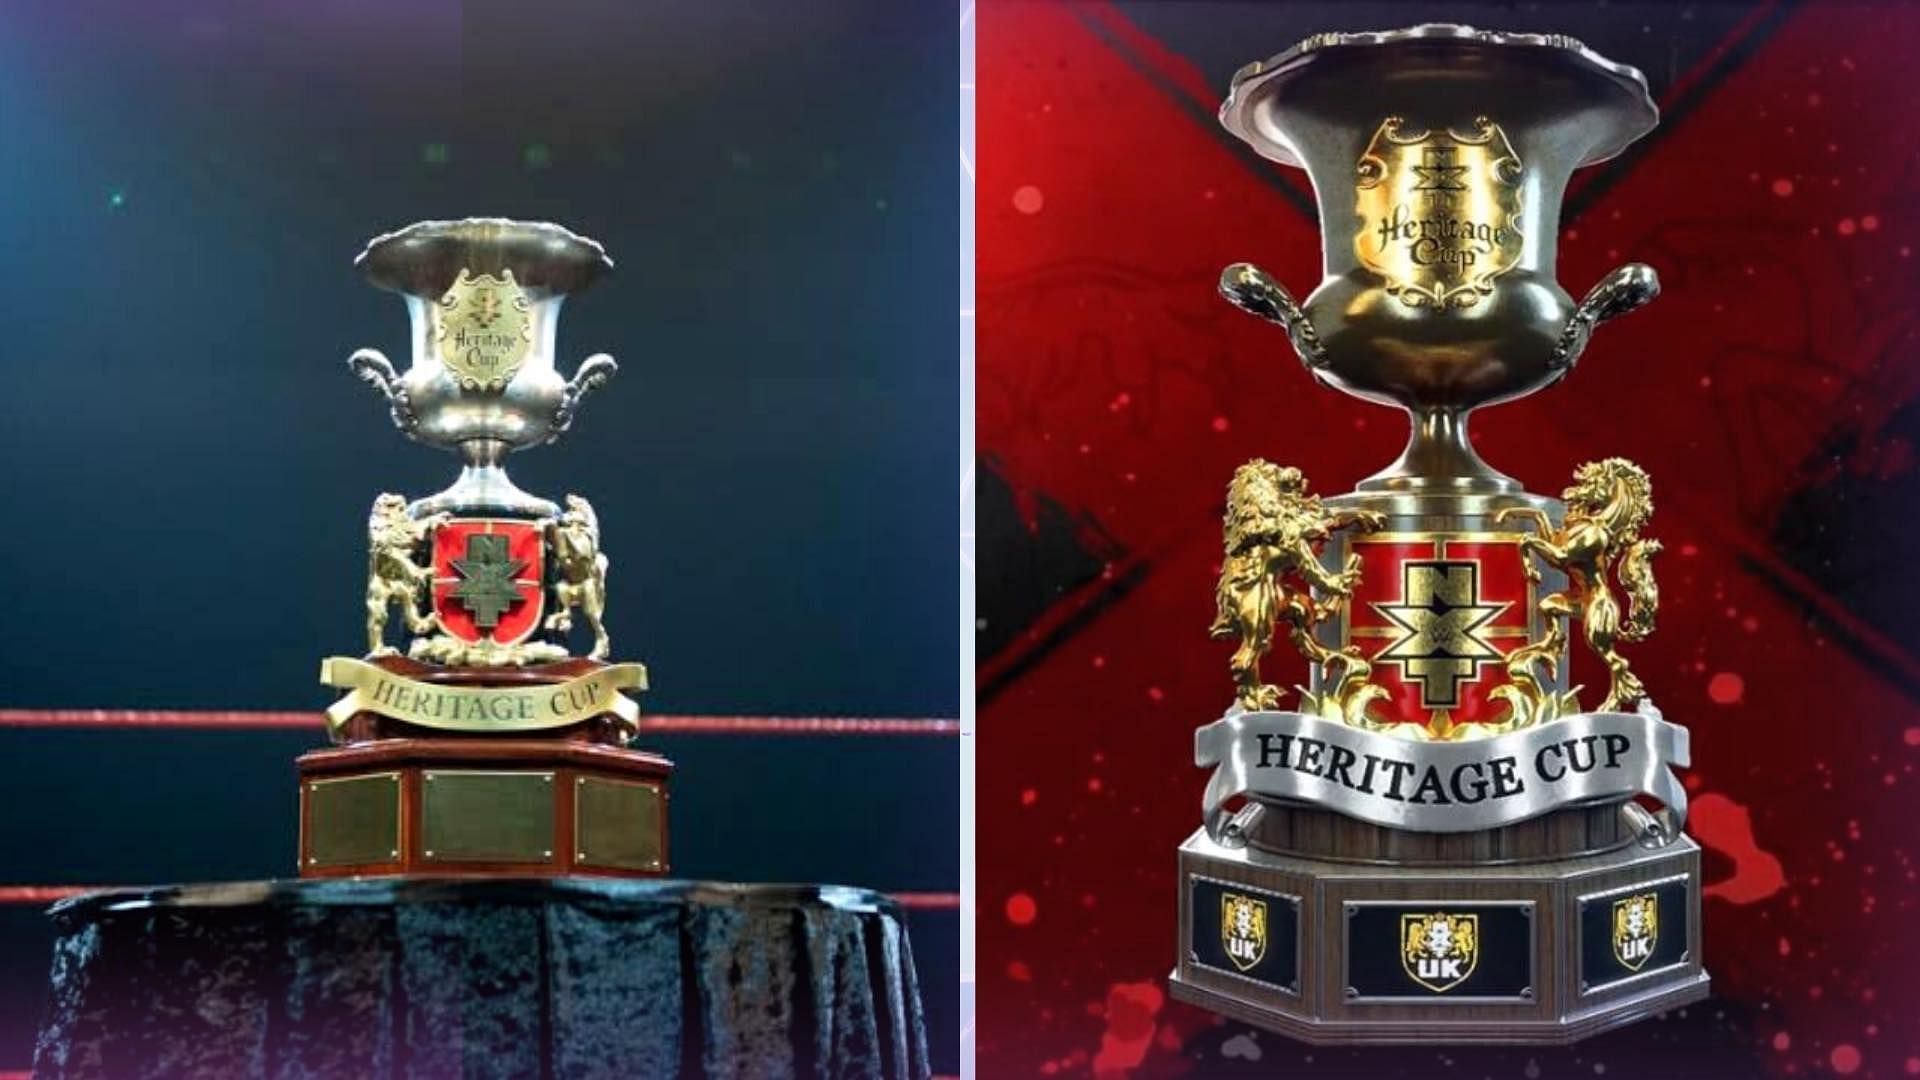 WWE NXT Heritage Cup 5 things you need to know about the brand's